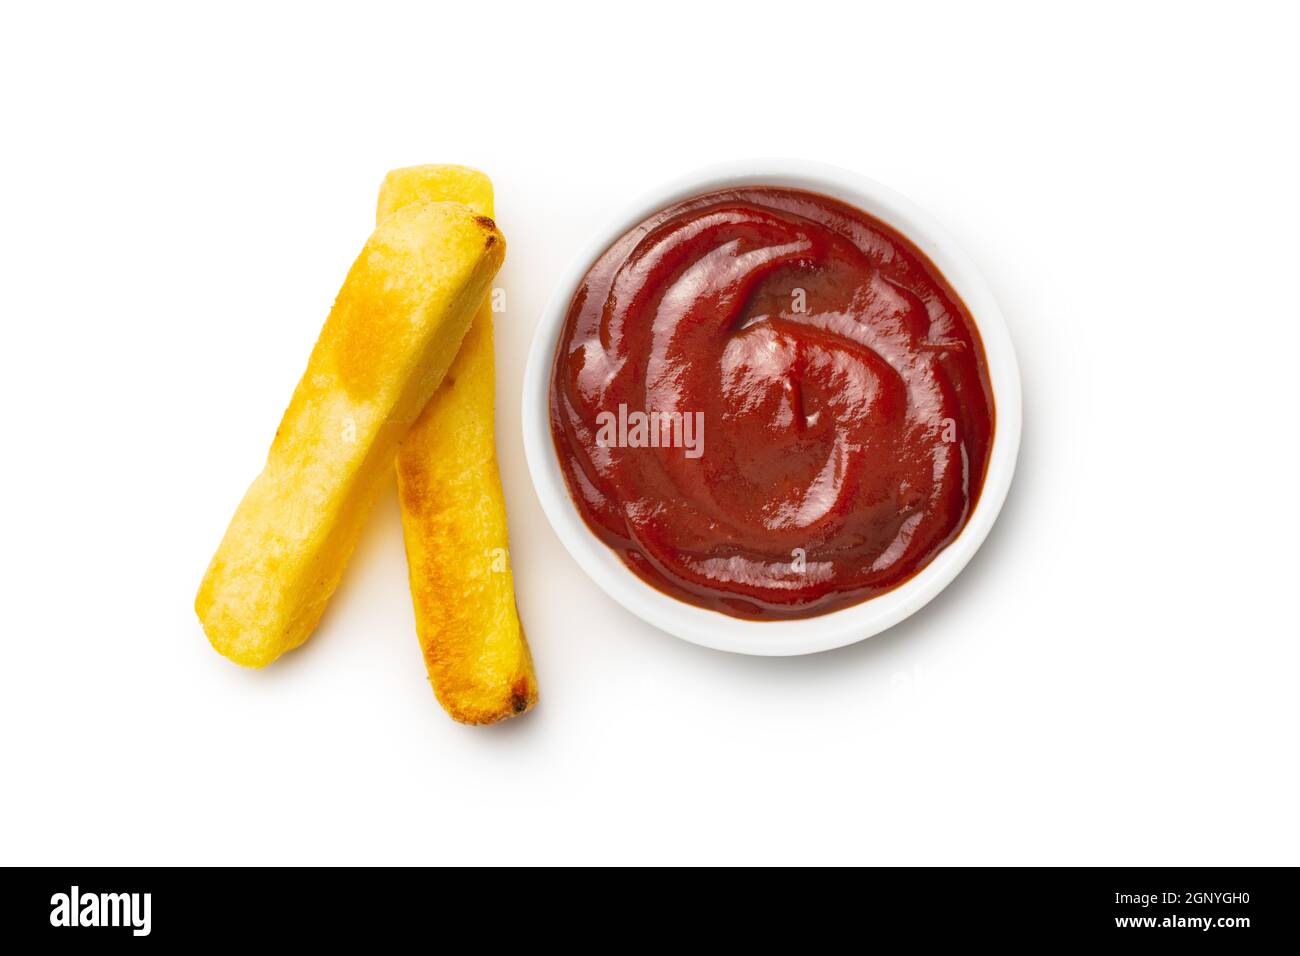 Big french fries. Fried potato chips with ketchup isolated on white background. Stock Photo